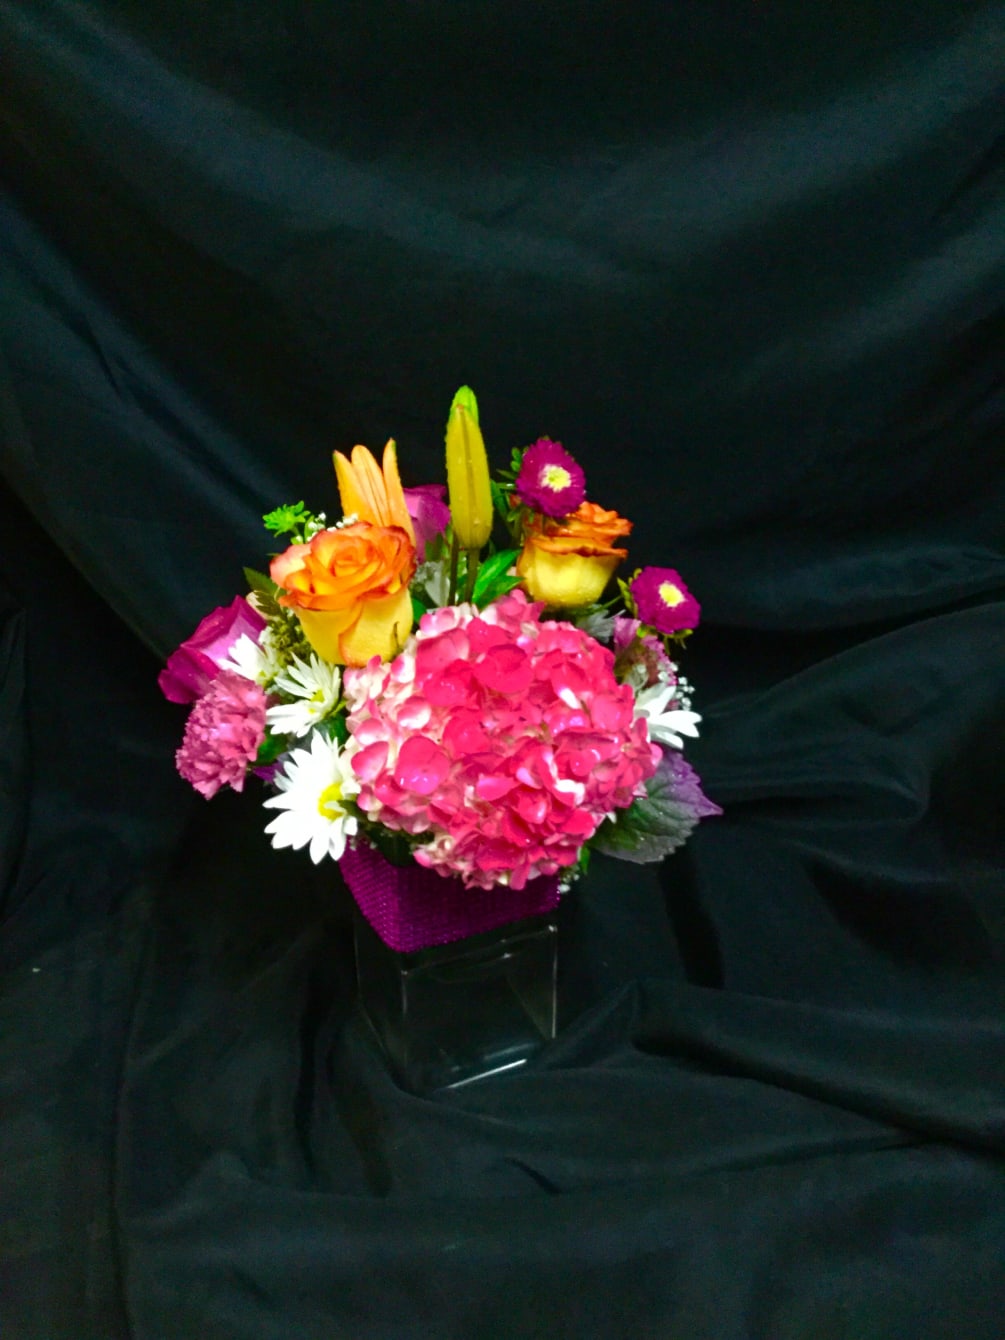 Assorted flowers in square vase. Hydrangeas, roses, lilies, daisies with green foliage